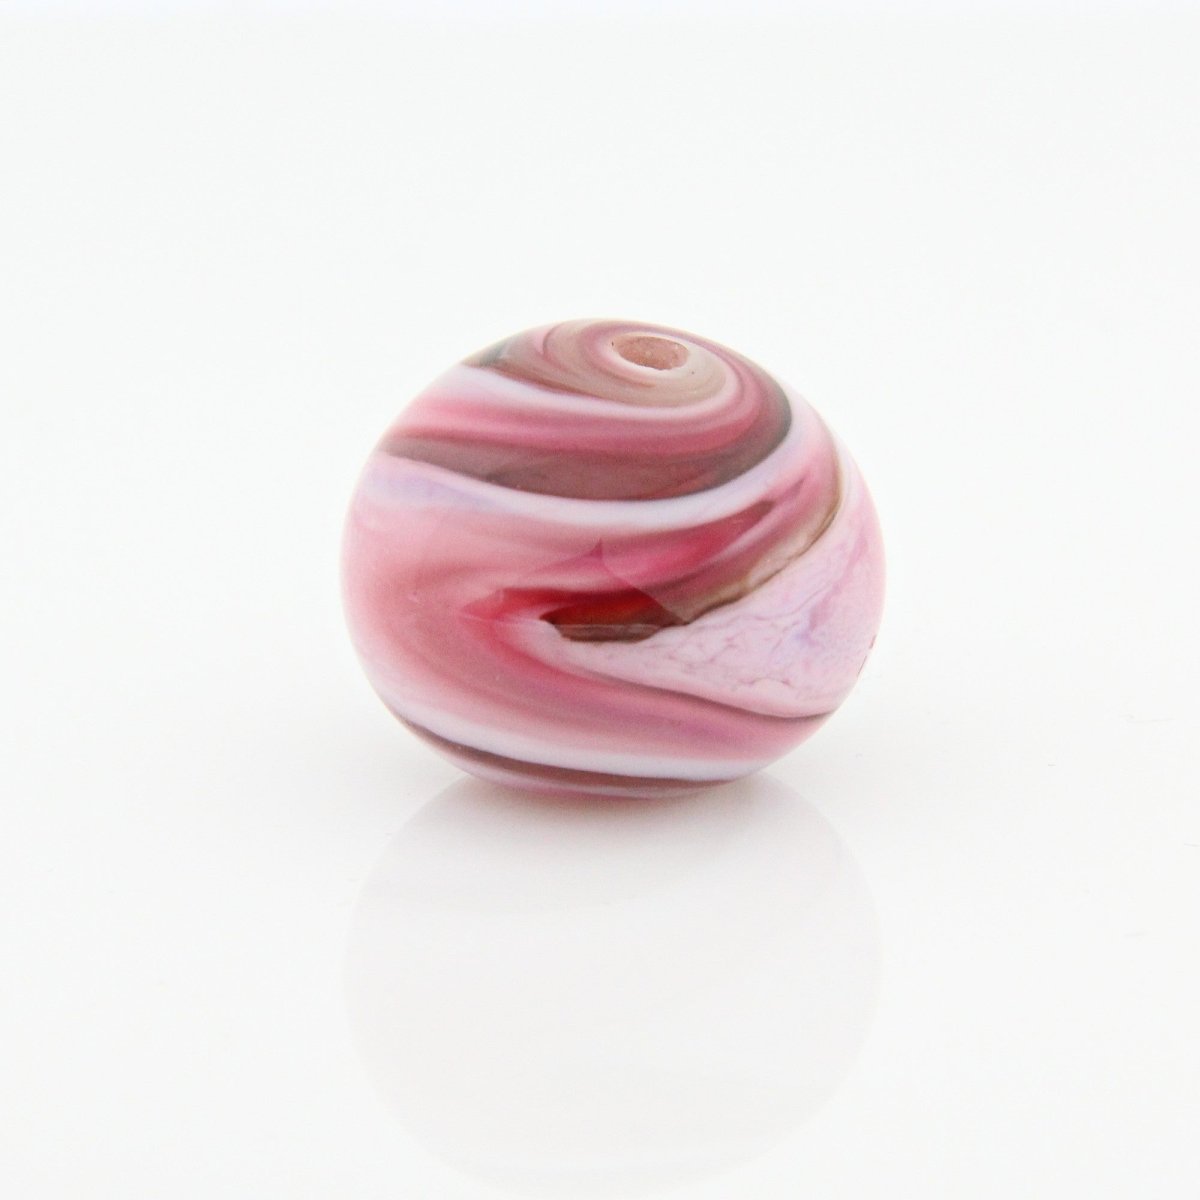 Pink Striped Statement Bead - Handmade Glass Lampwork, Unique Focal Bead for Pendant, Suncatcher, or Home Decorating